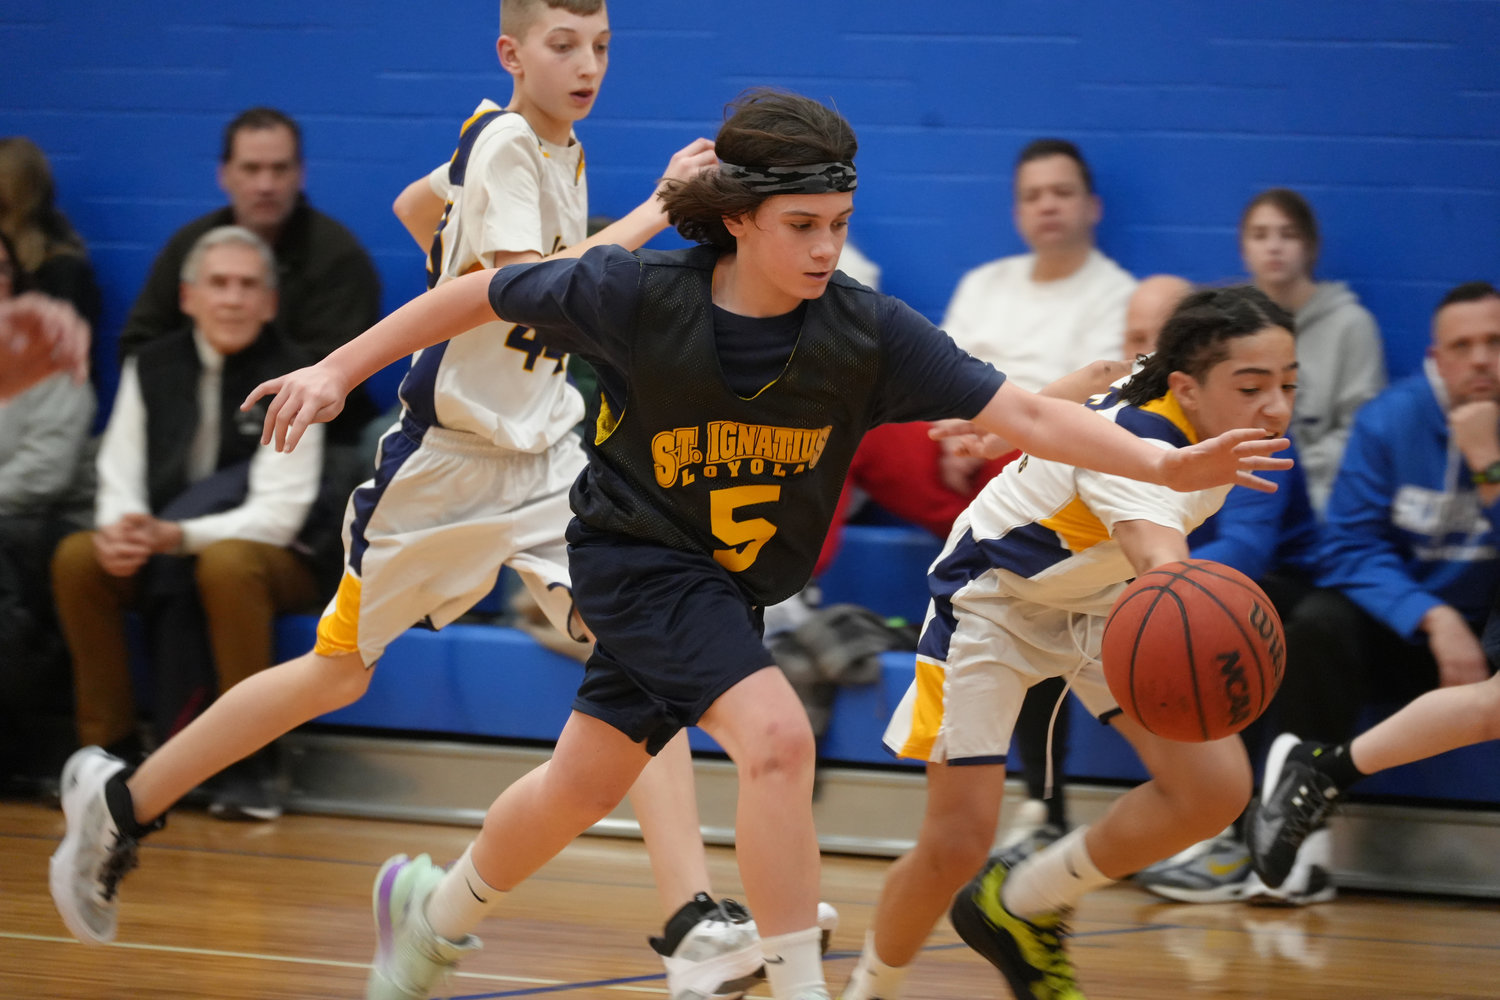 Seventh-grader Austin Wolff, from St. Ignatius Loyola, in Hicksville, moved the ball against St. Joseph’s, of Ronkonkoma, last Saturday at the 15th annual Winter Classic basketball tournament at St. Raphael’s.